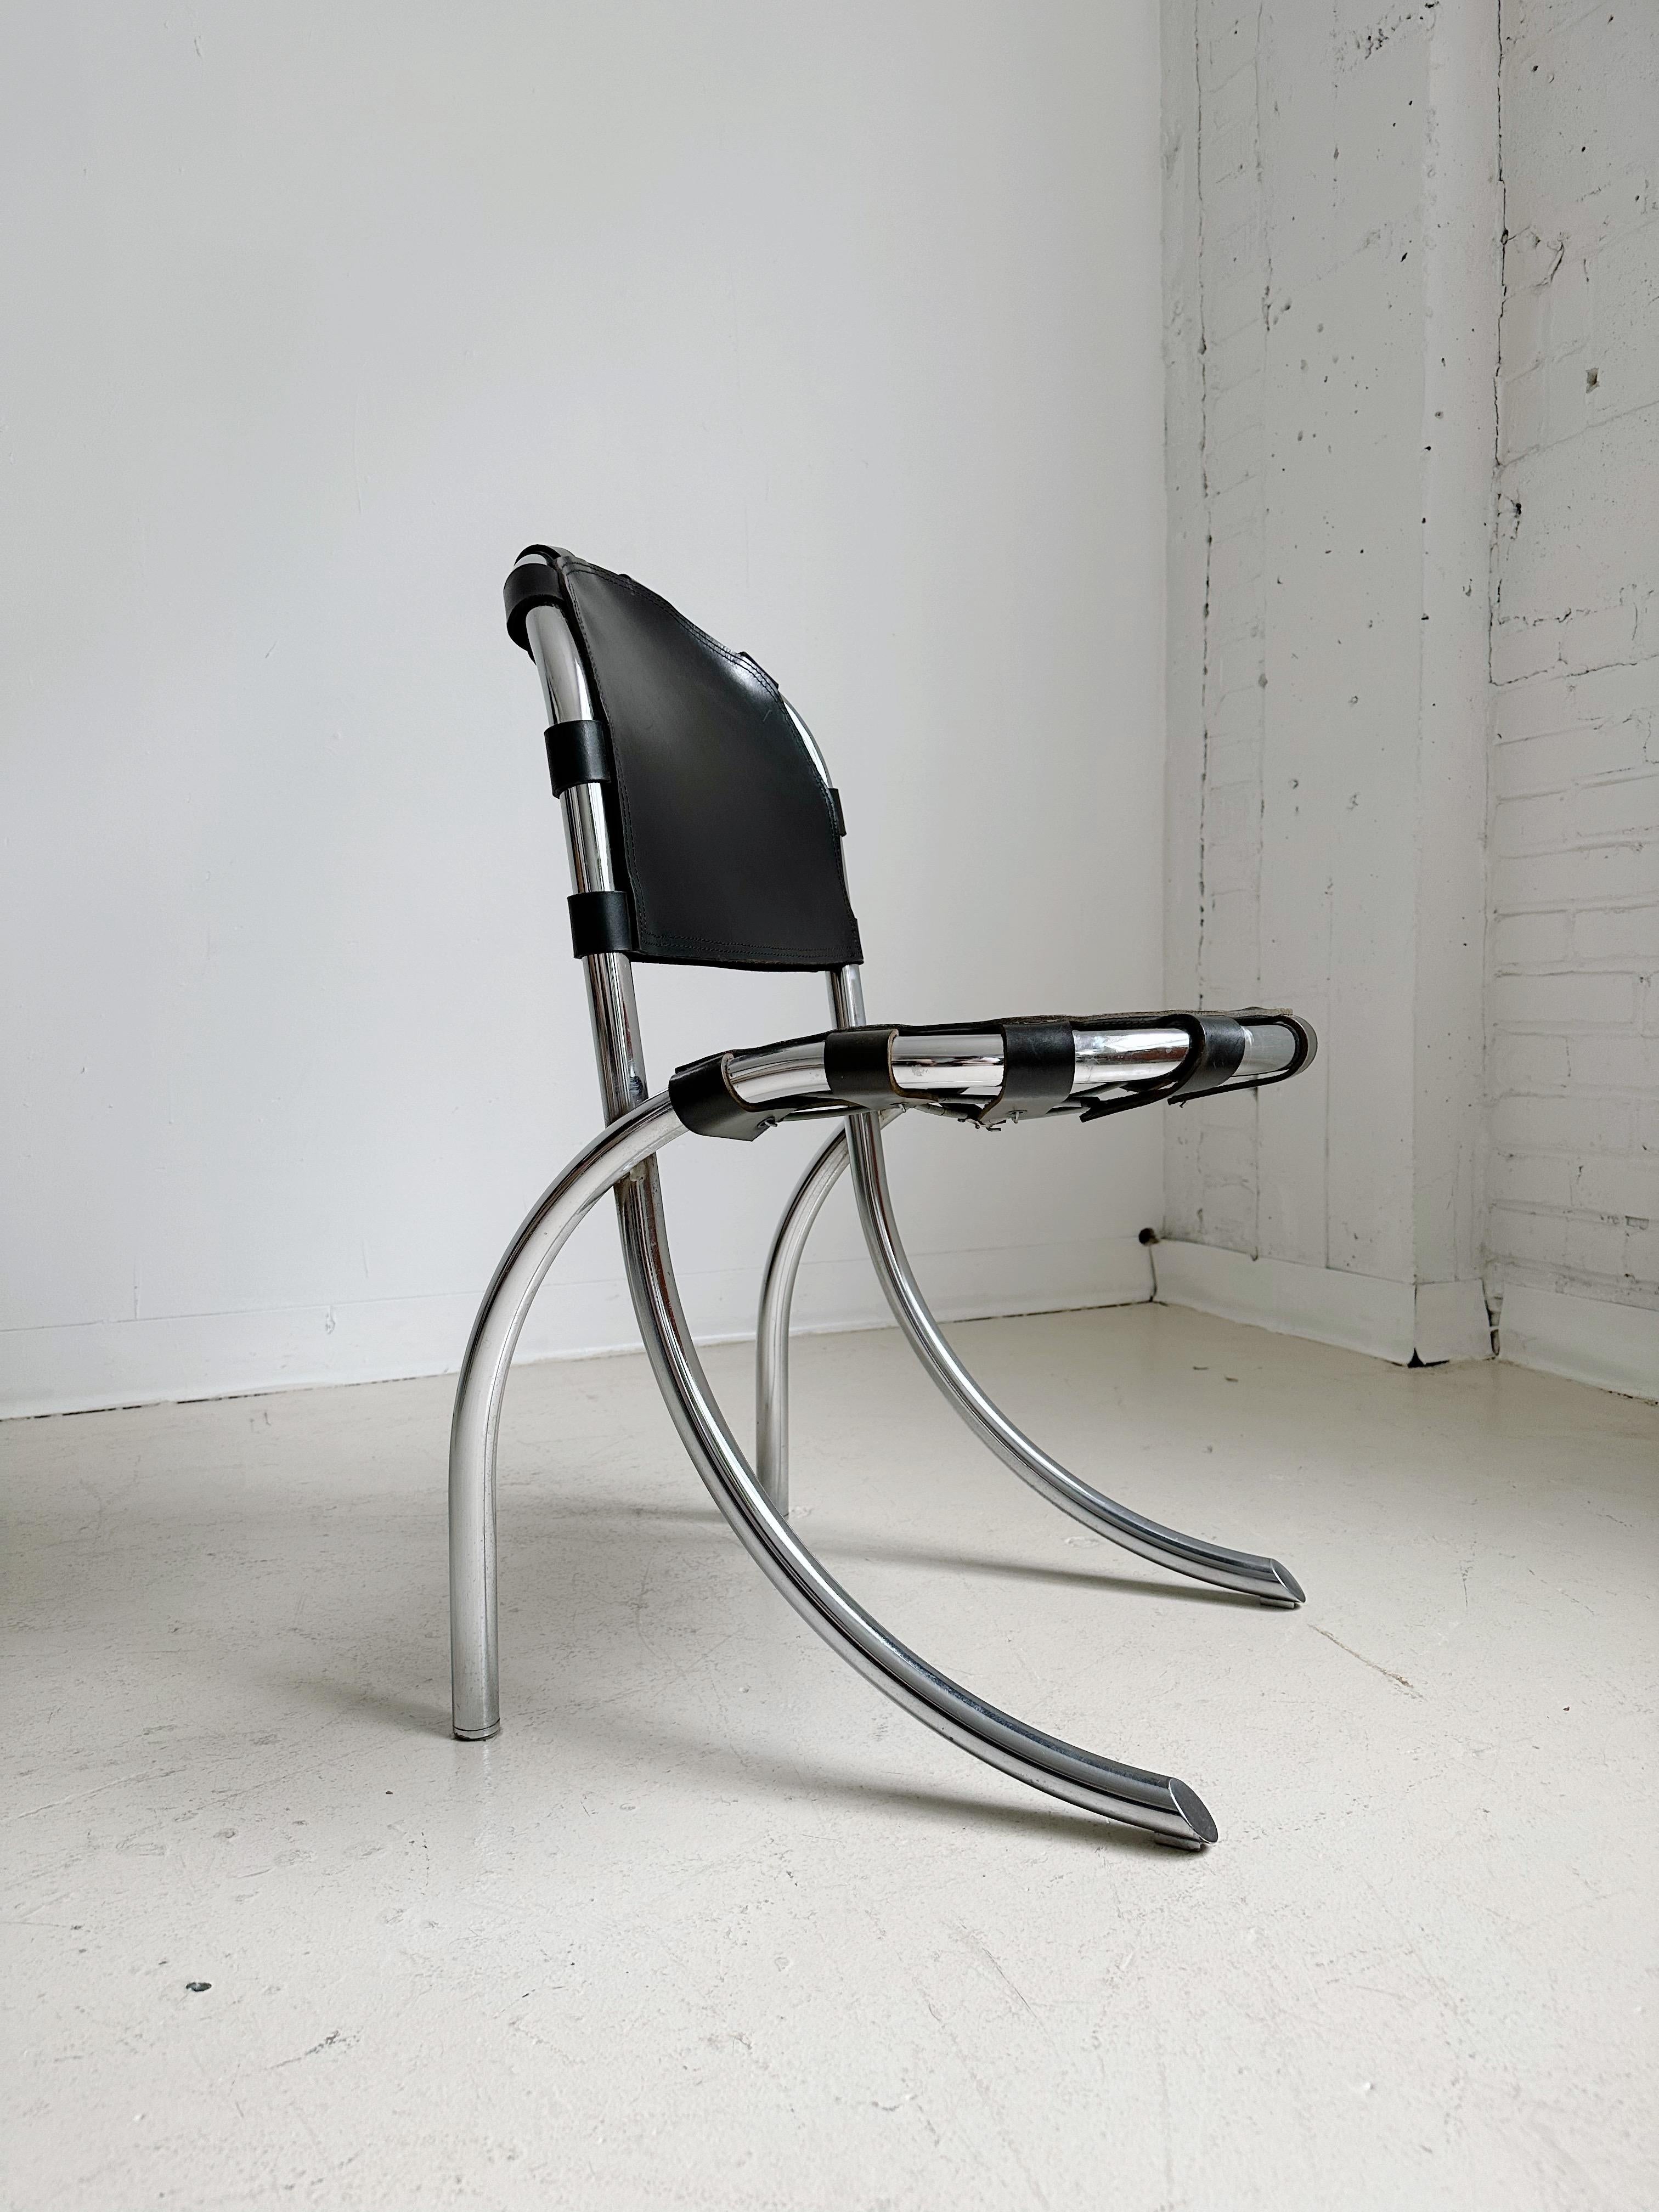 Medusa Dining Chairs by Studio Tetrarch for Alberto Bazzani, Set of 4, 60's

Features a curved chrome frame and thick black leather seat & back

//

Dimensions:
18”W x 20”D x 32”H  each

18.5” seat height

Sold as a set

//

*Very good condition,